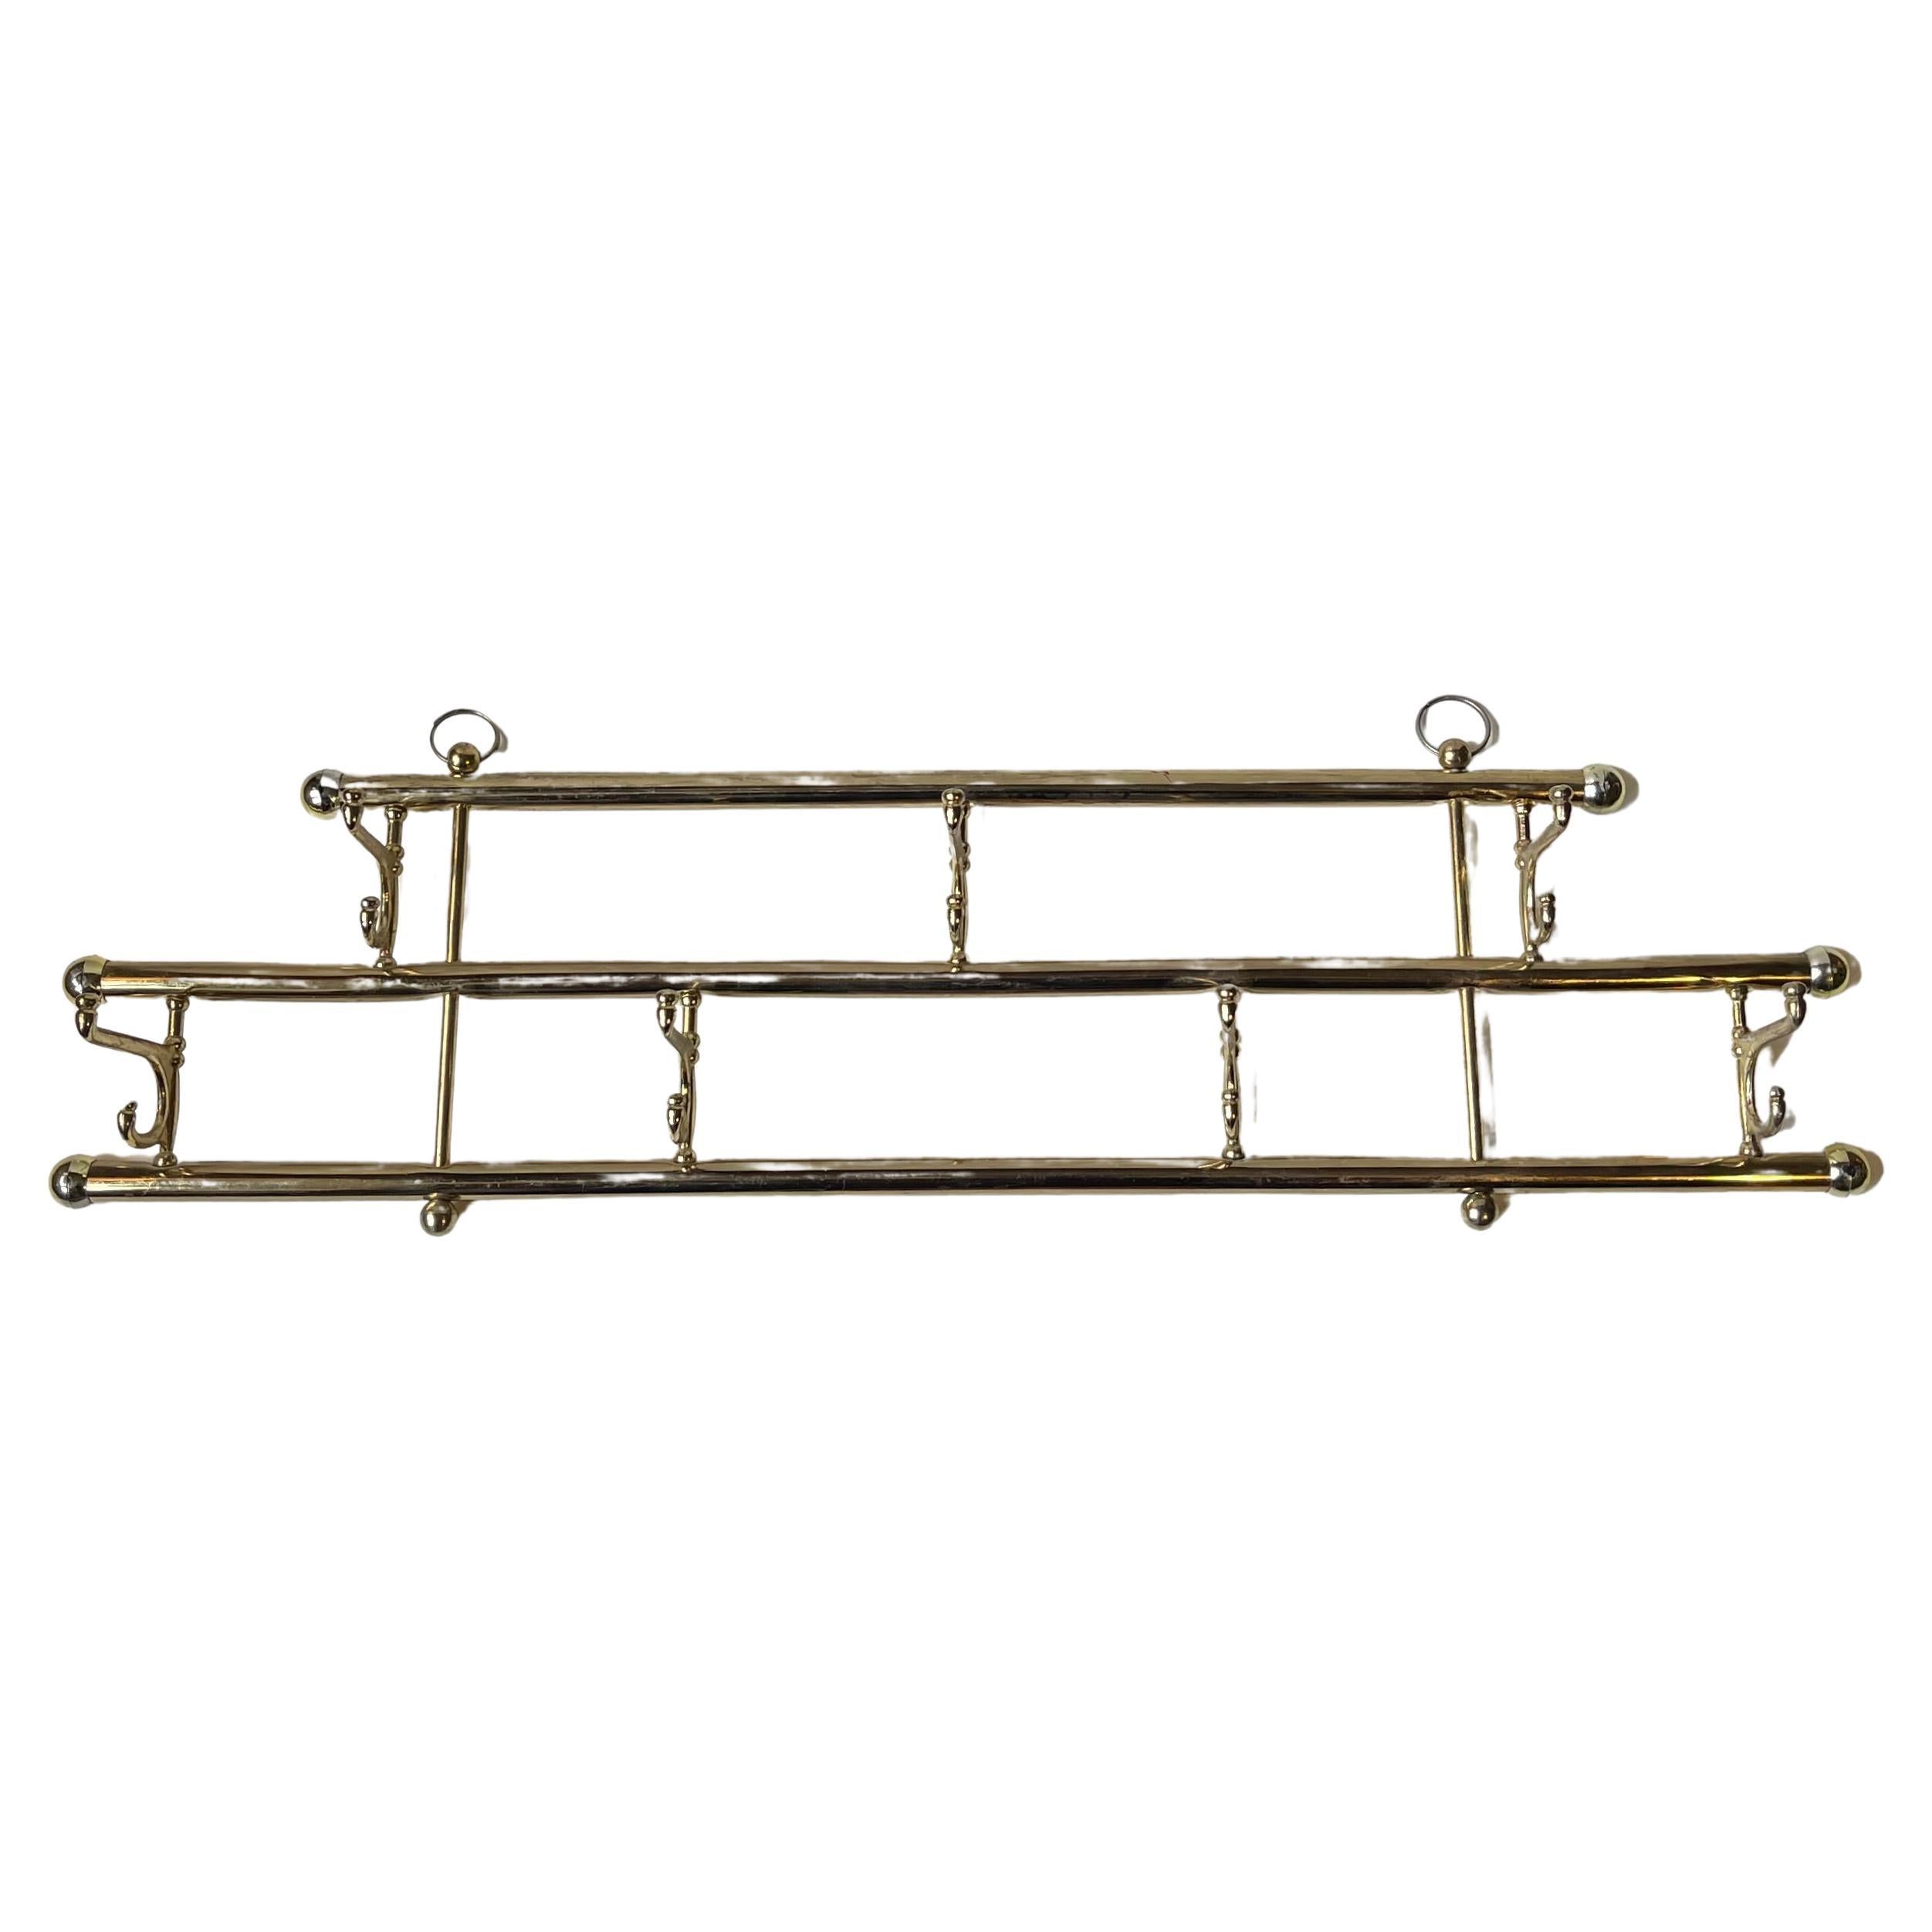 Vintage Towel or Small Coat Rack in Brass and Gold Chrome For Sale